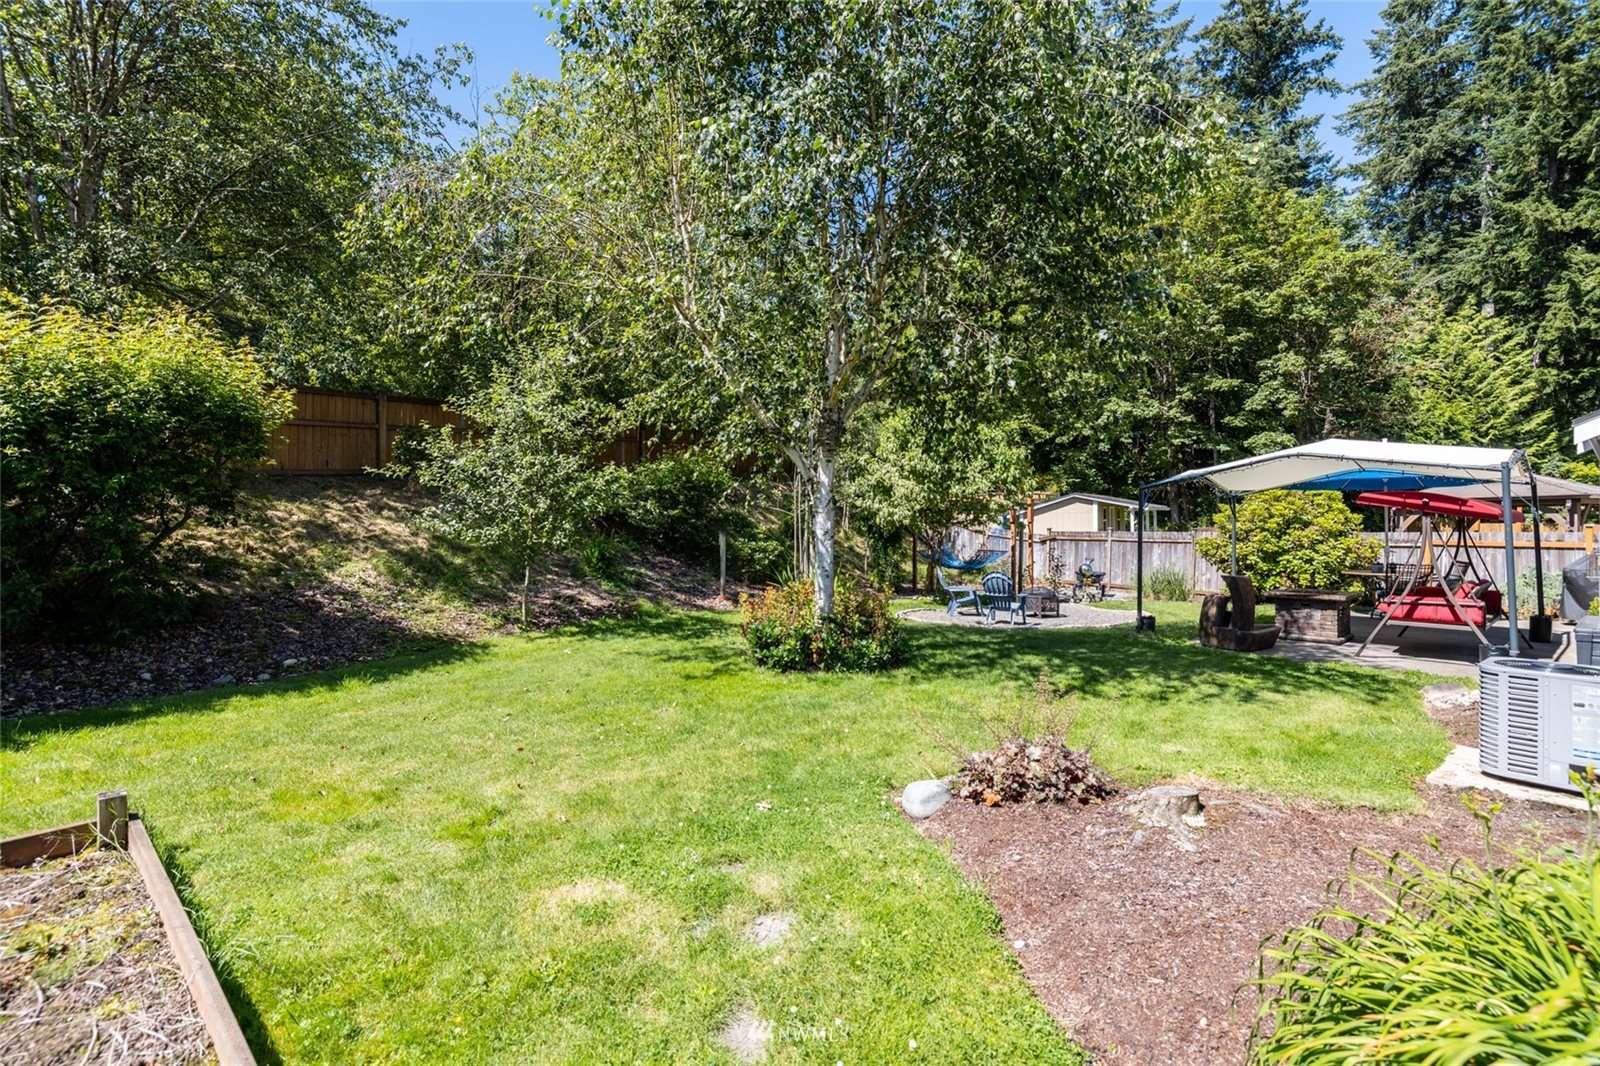 23361 SE 243rd Place, Maple Valley, WA 98038